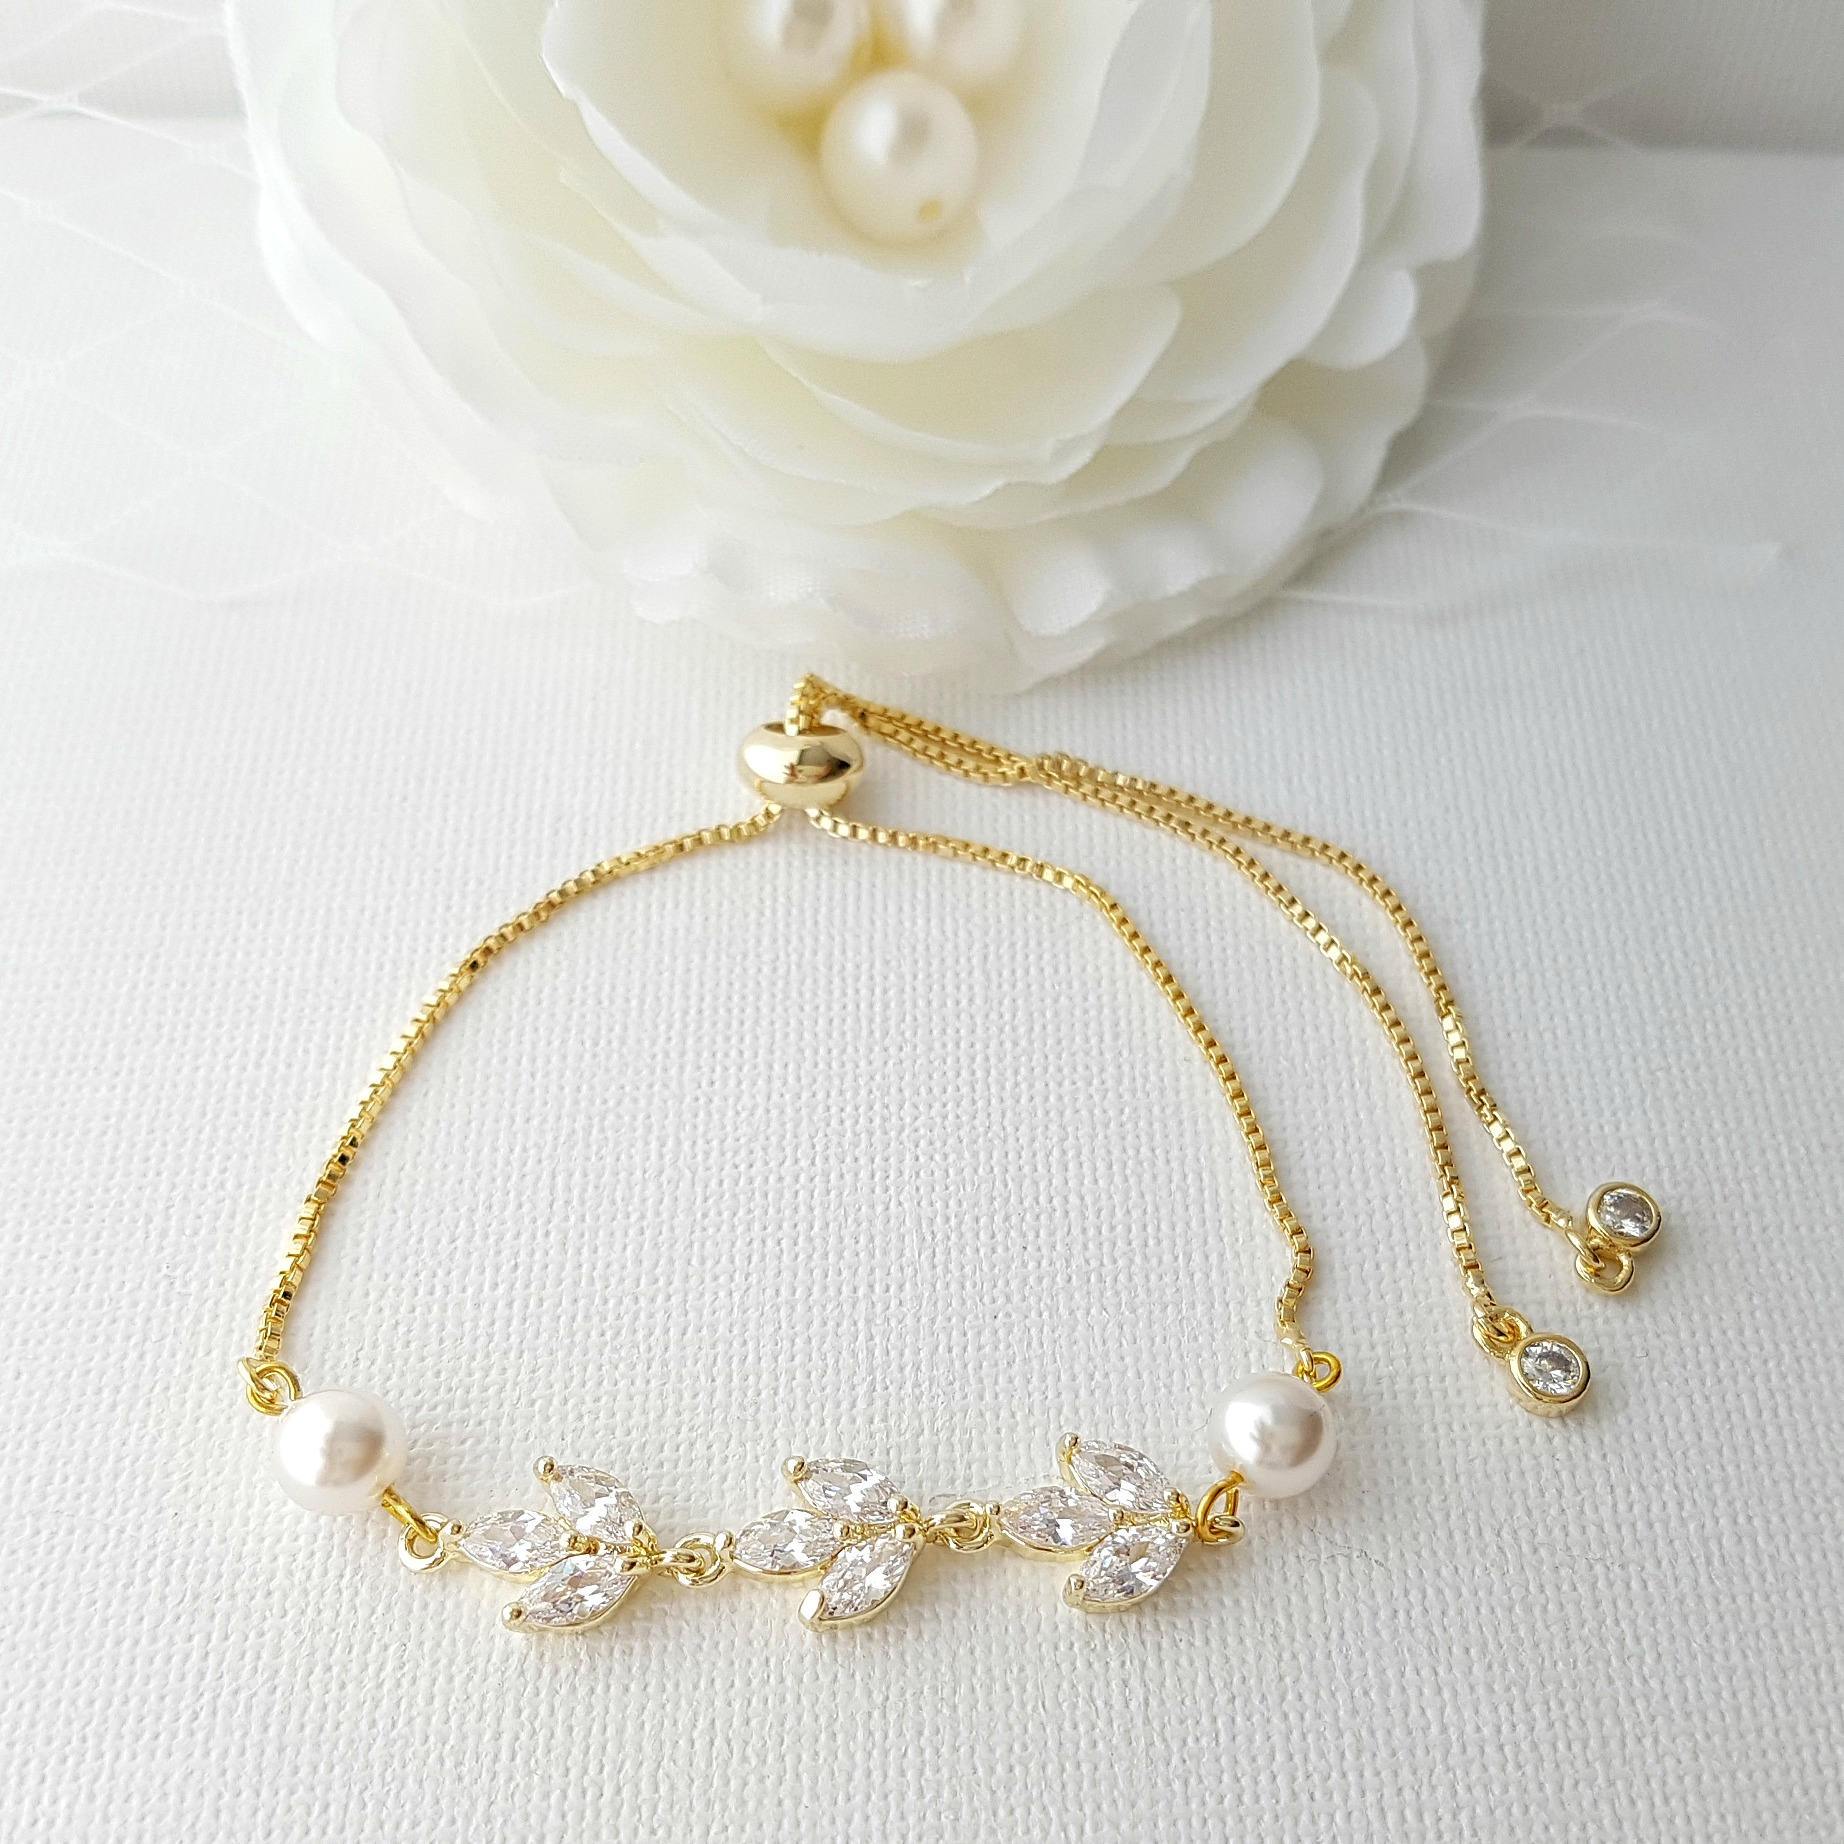 Coco Pearl Yard Bracelet in 9ct Gold — The Jewel Shop